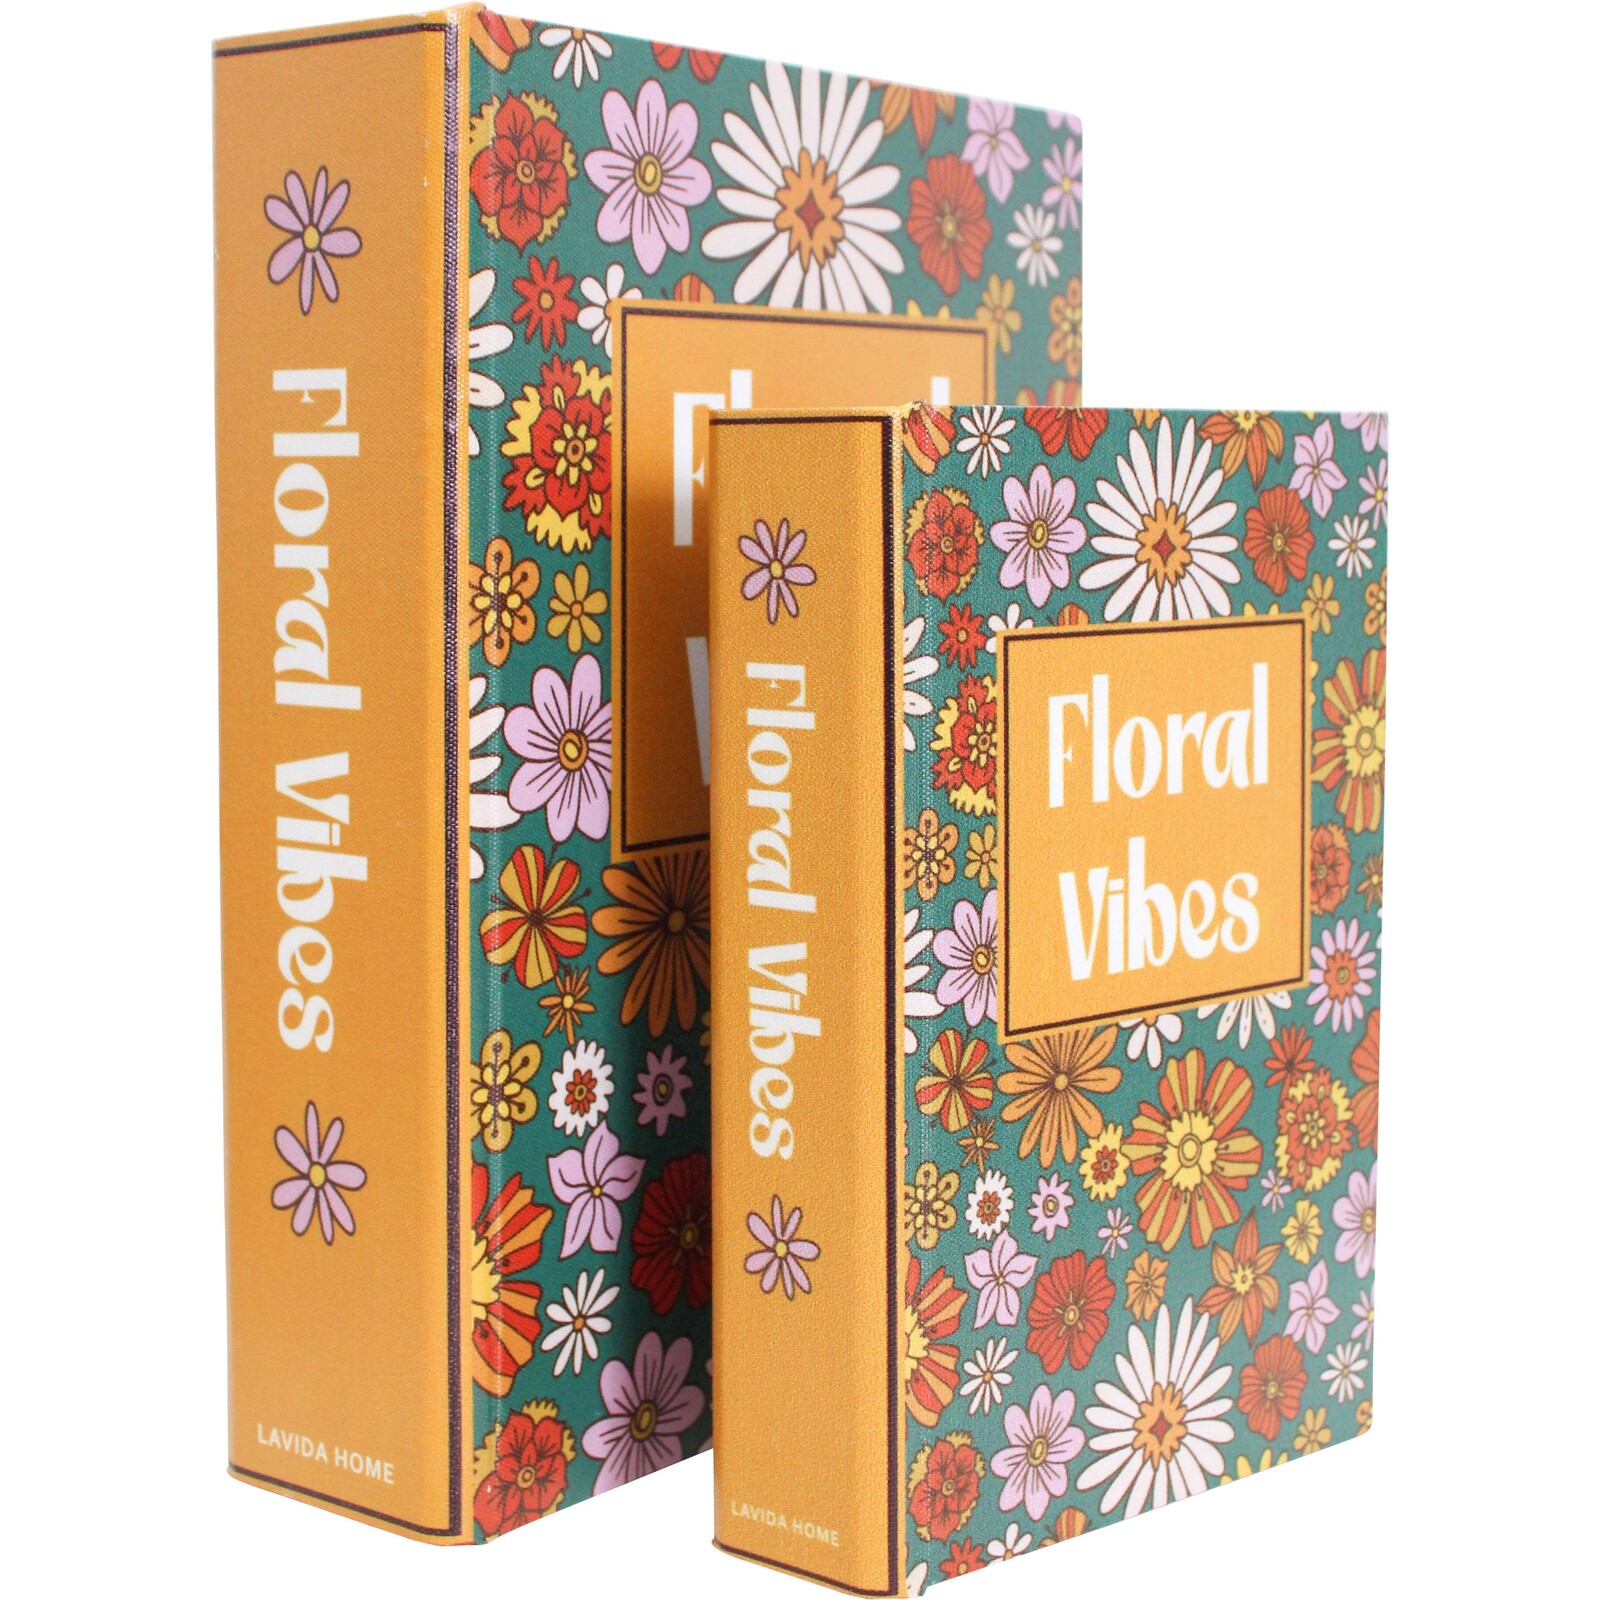 Book Box S/2 Floral Vibes